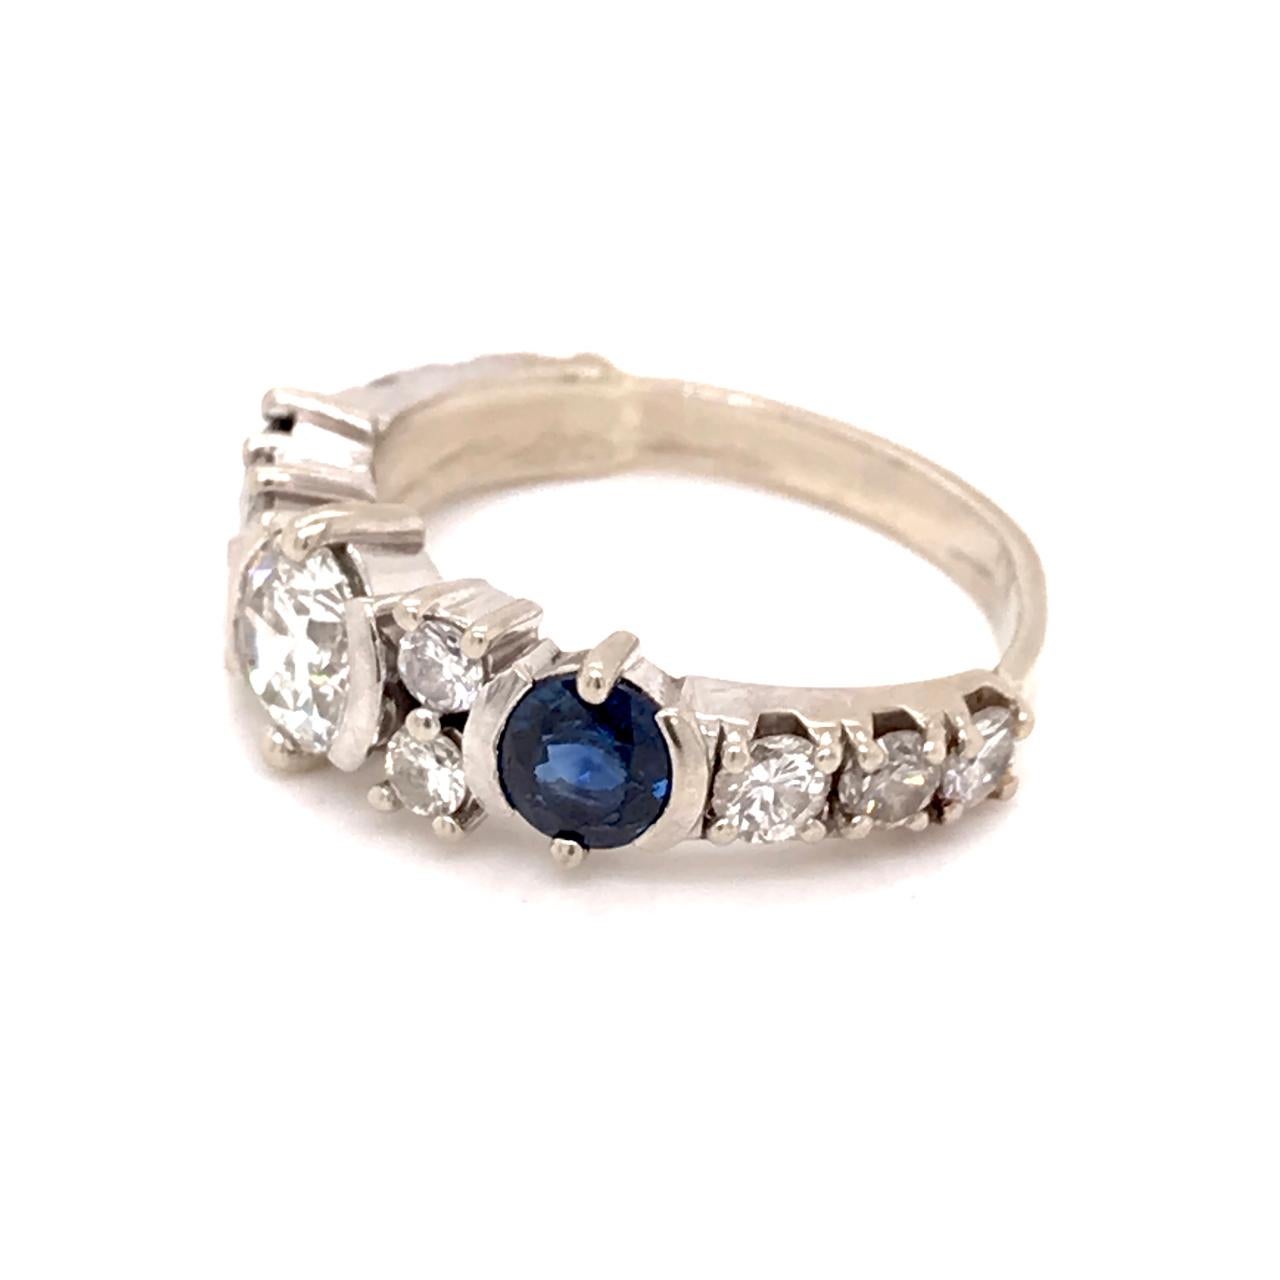 Vintage 14k White Gold, Diamond, & Sapphire Art Deco Style Cocktail Ring For Sale 5